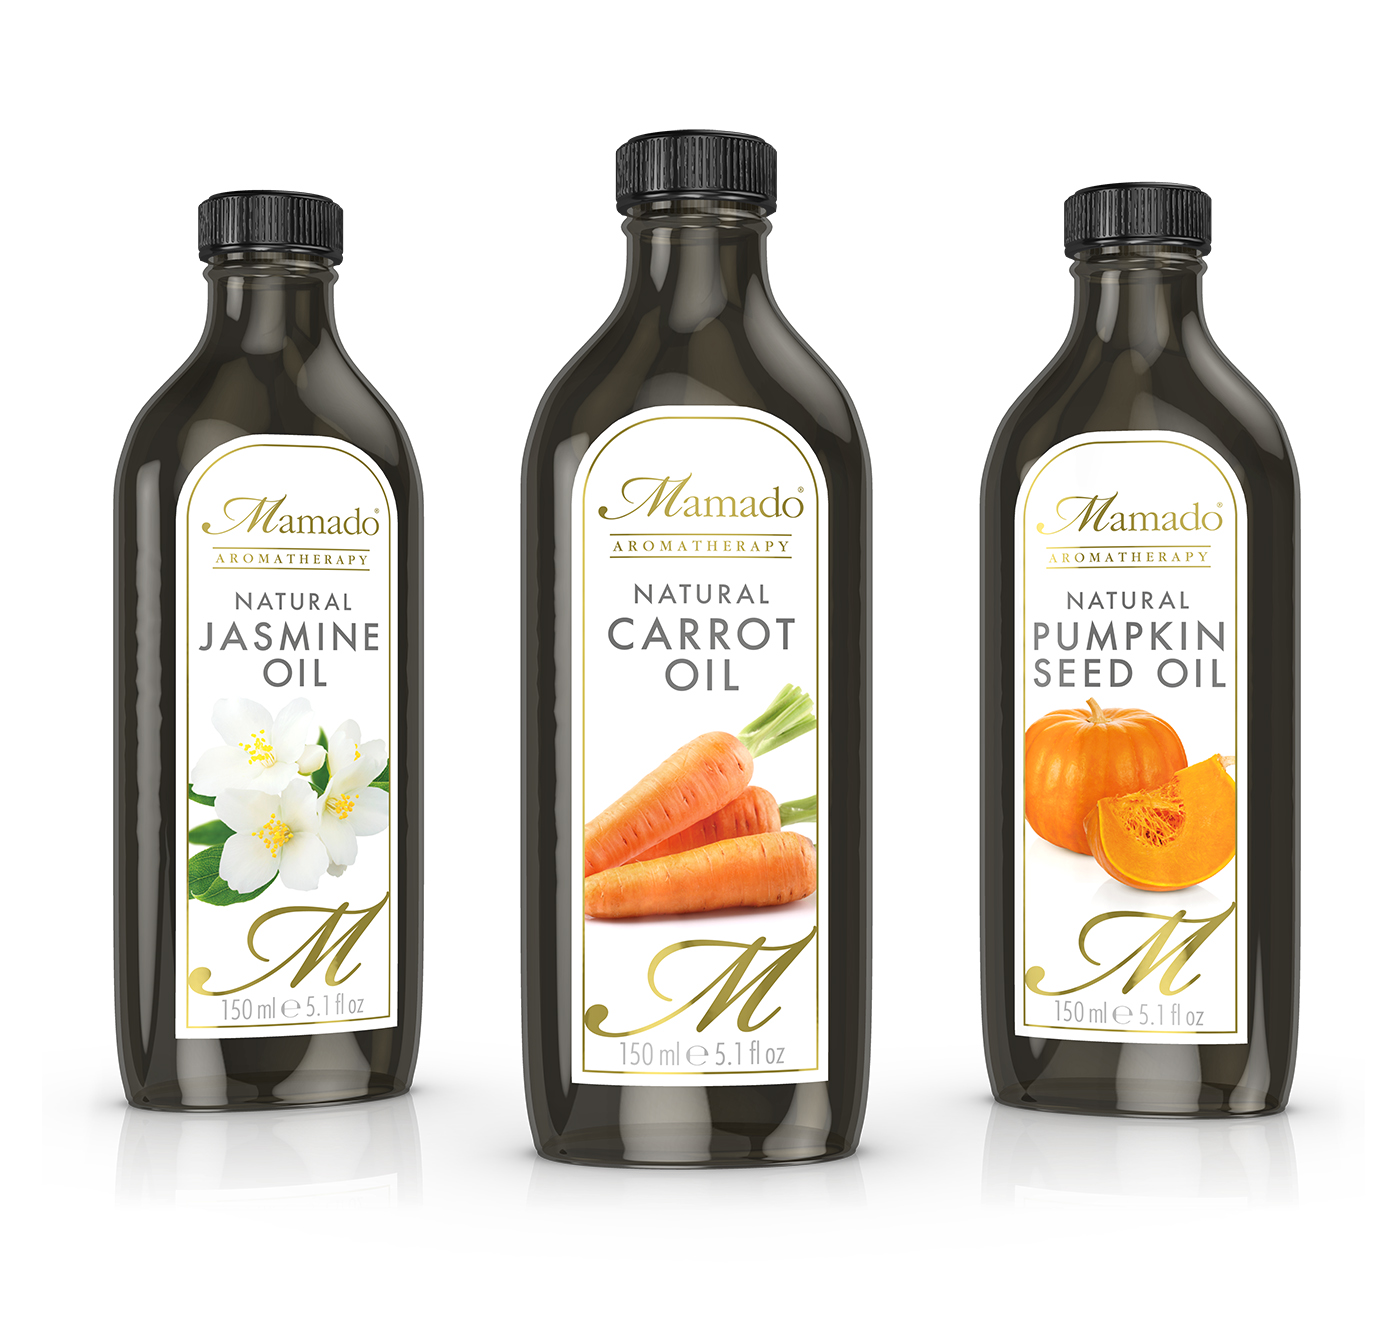 3D design visual of three bottles of essential oil; Jasmine, Carrot and Pumpkin Seed oils. Label graphics design by Paul Cartwright Branding.